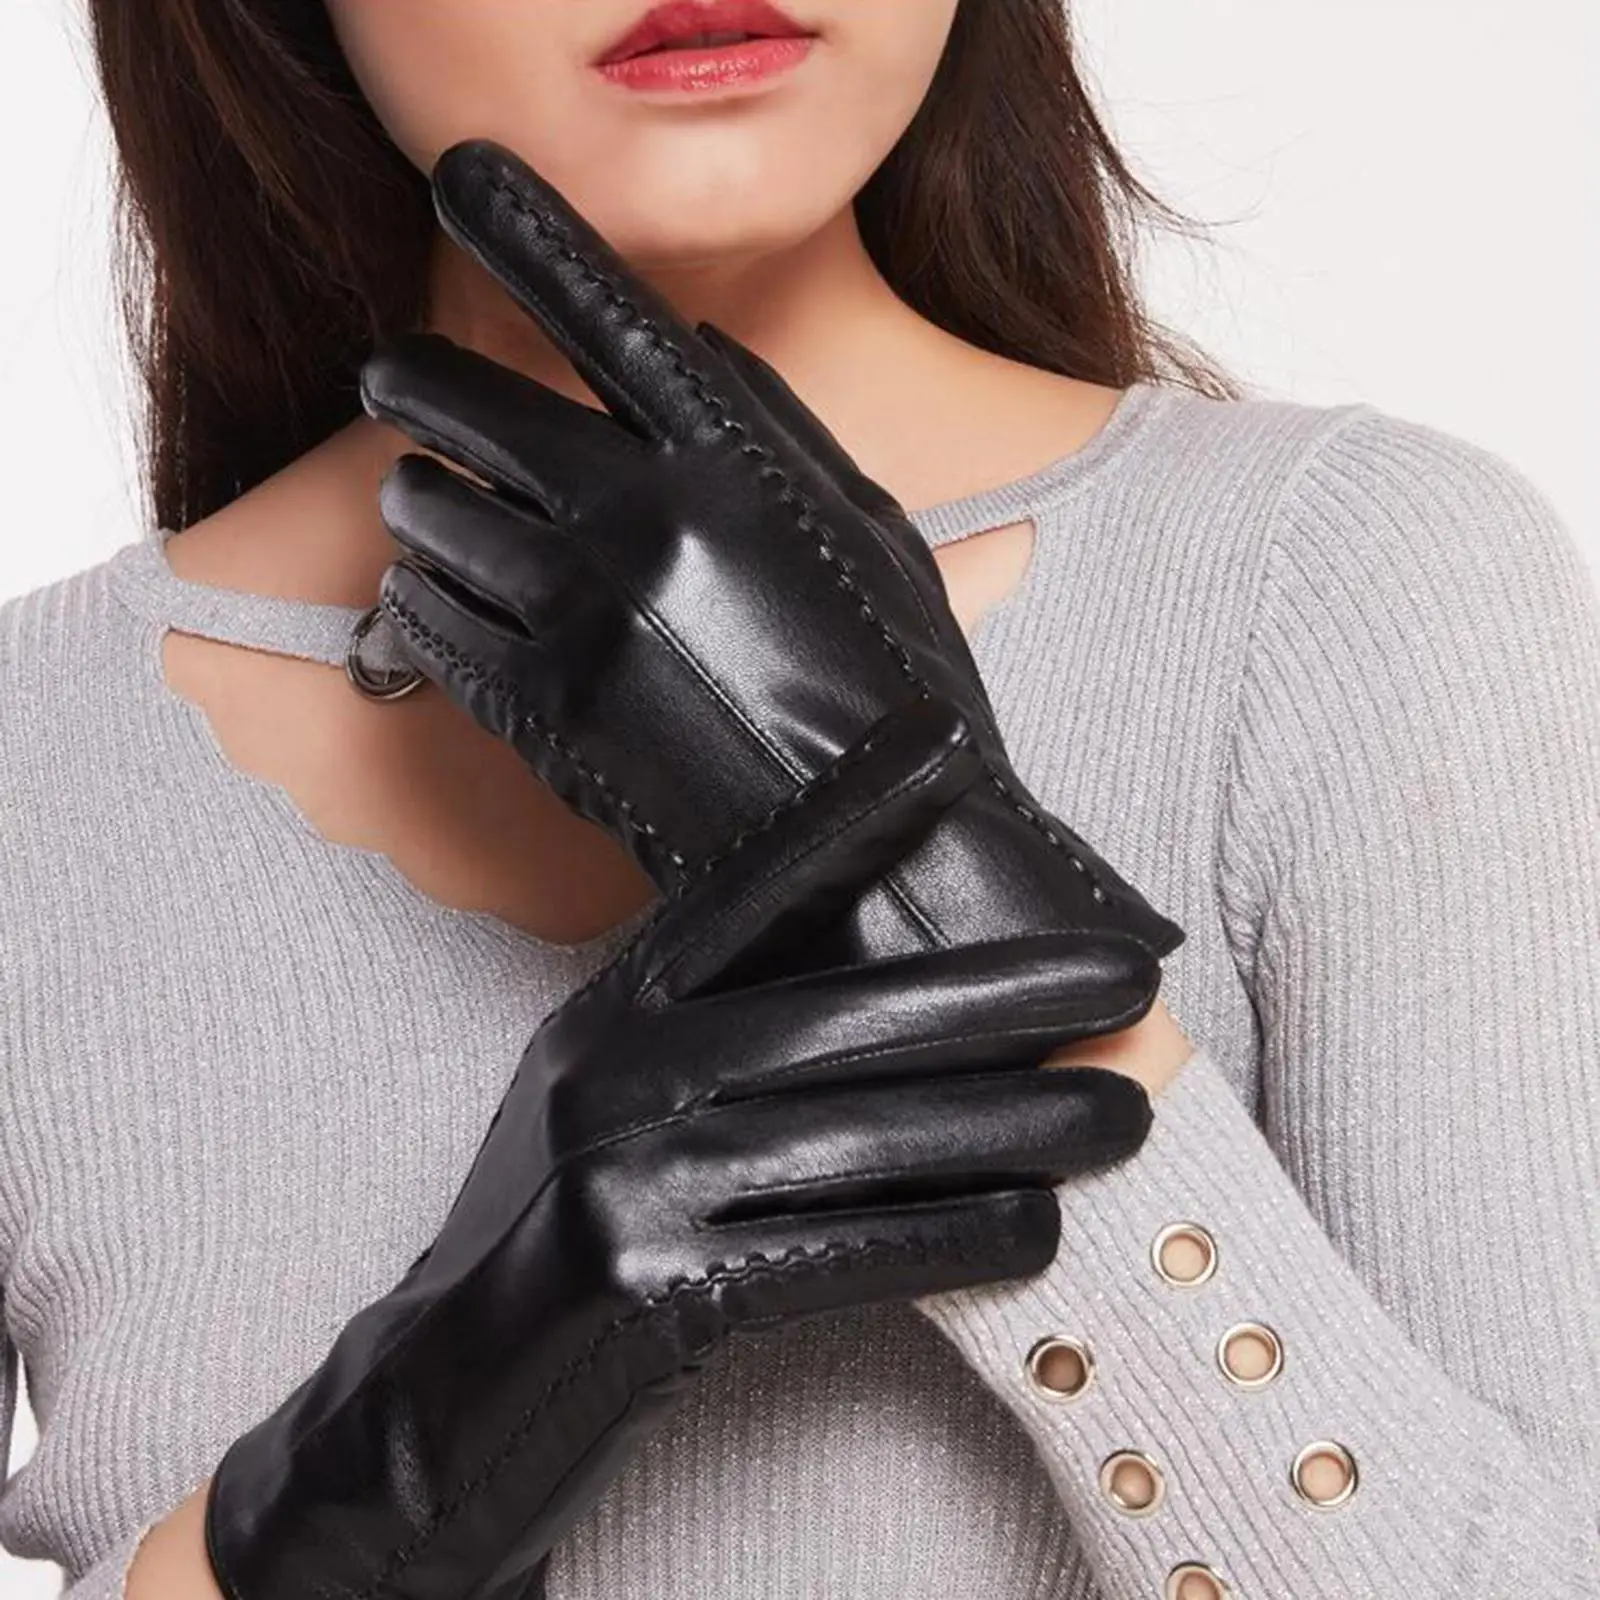 Winter Leather Gloves for Women, Touchscreen Texting Gloves with Thermal Cashmere Lining, Fashion Driving Gloves